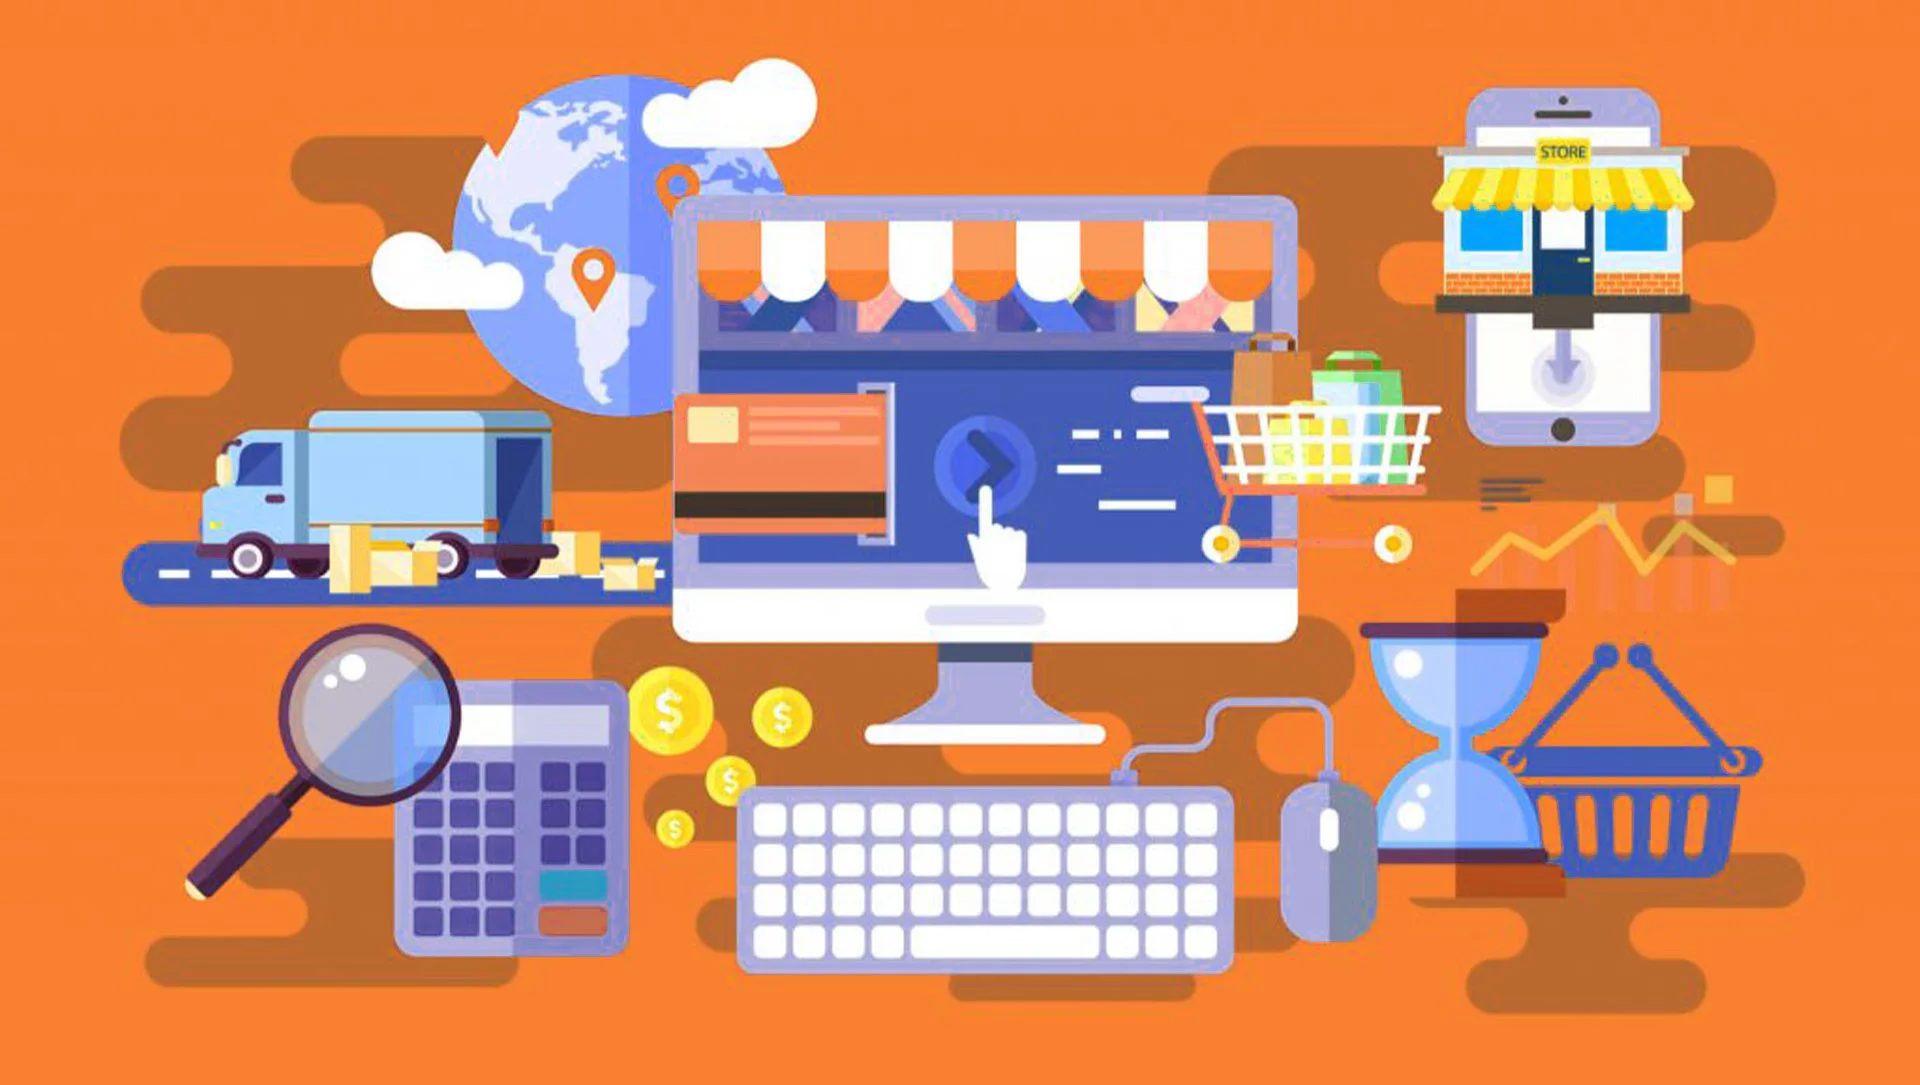 ecommerce-security-importance-factors-mistakes-how-to-avoid-them-related-blog-15